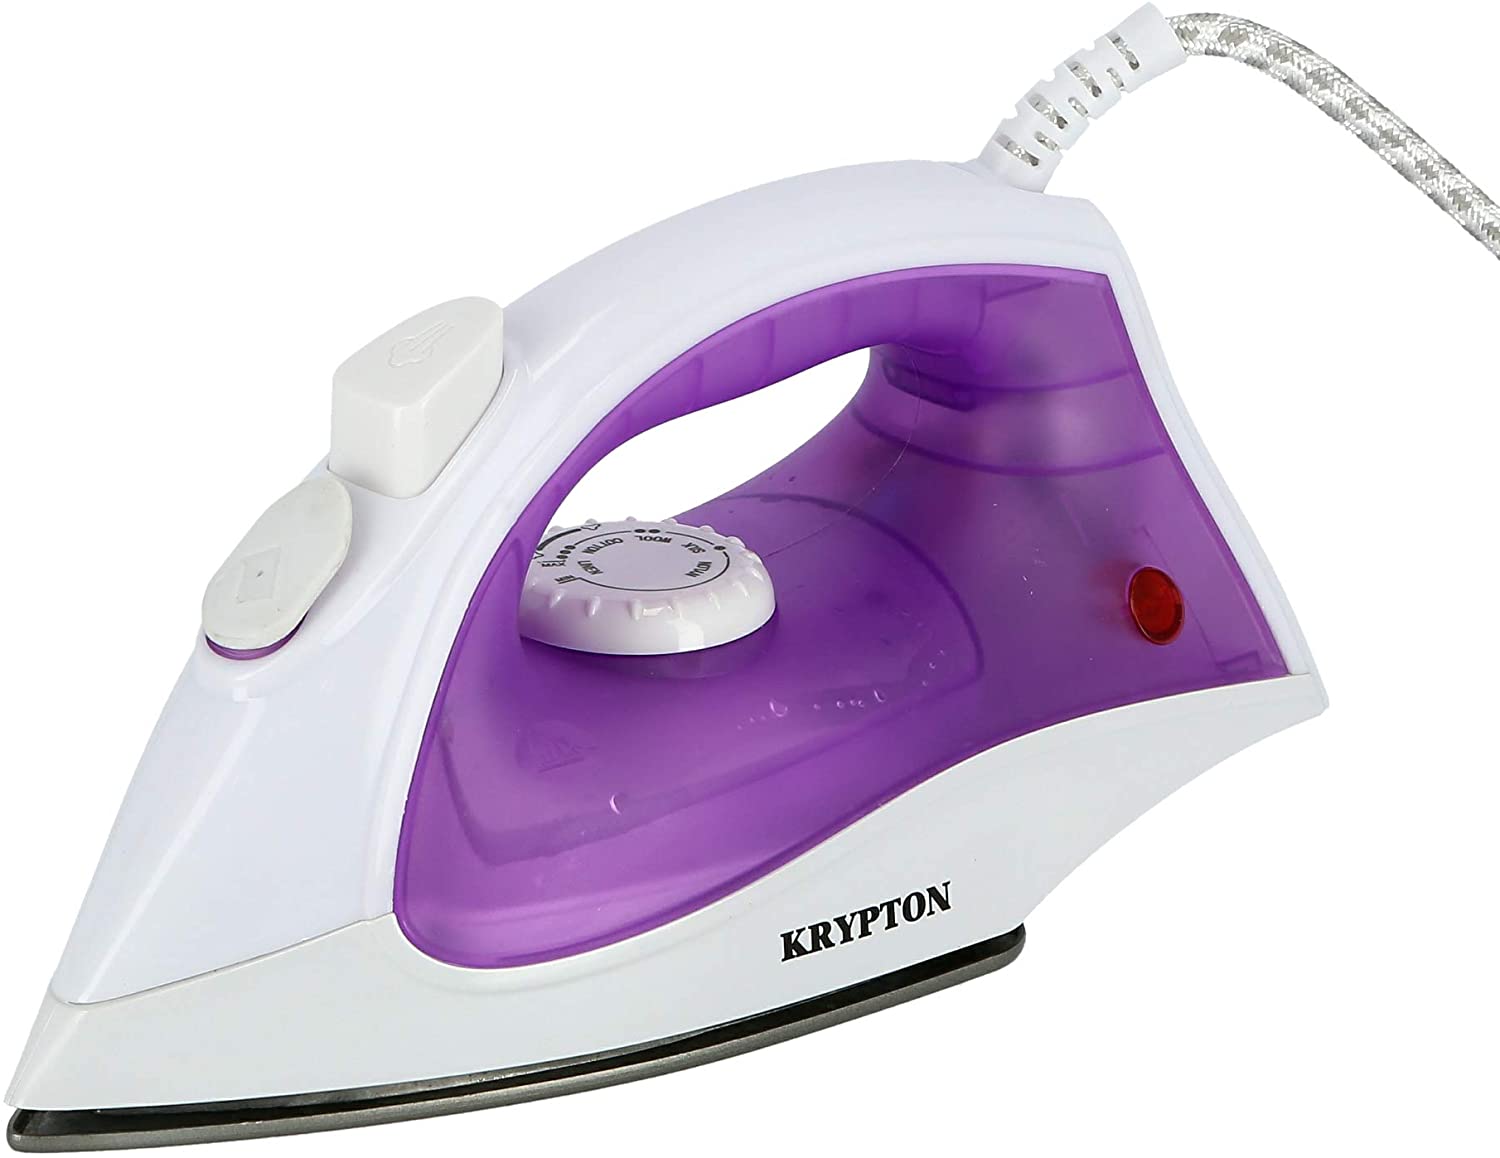 Krypton Steam Iron 1200W White | reliable performance | lightweight | variable steam settings | safety features | stylish | even heat distribution | Halabh.com